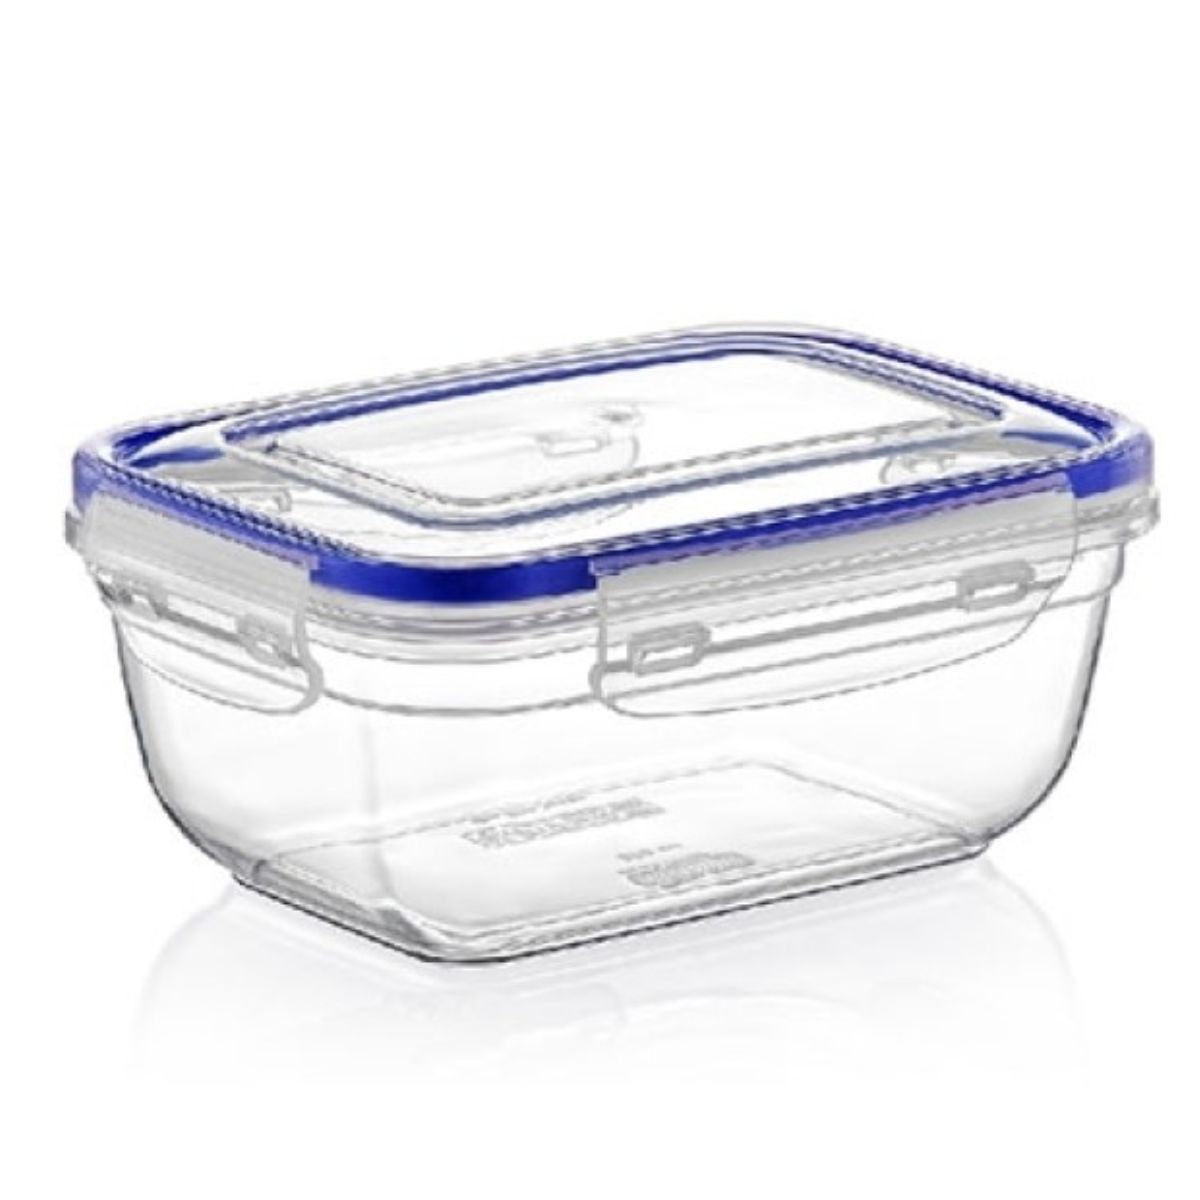 A Lock & Fresh - Seal Rectangle Storage - 1400ml container with blue lid on a white background.